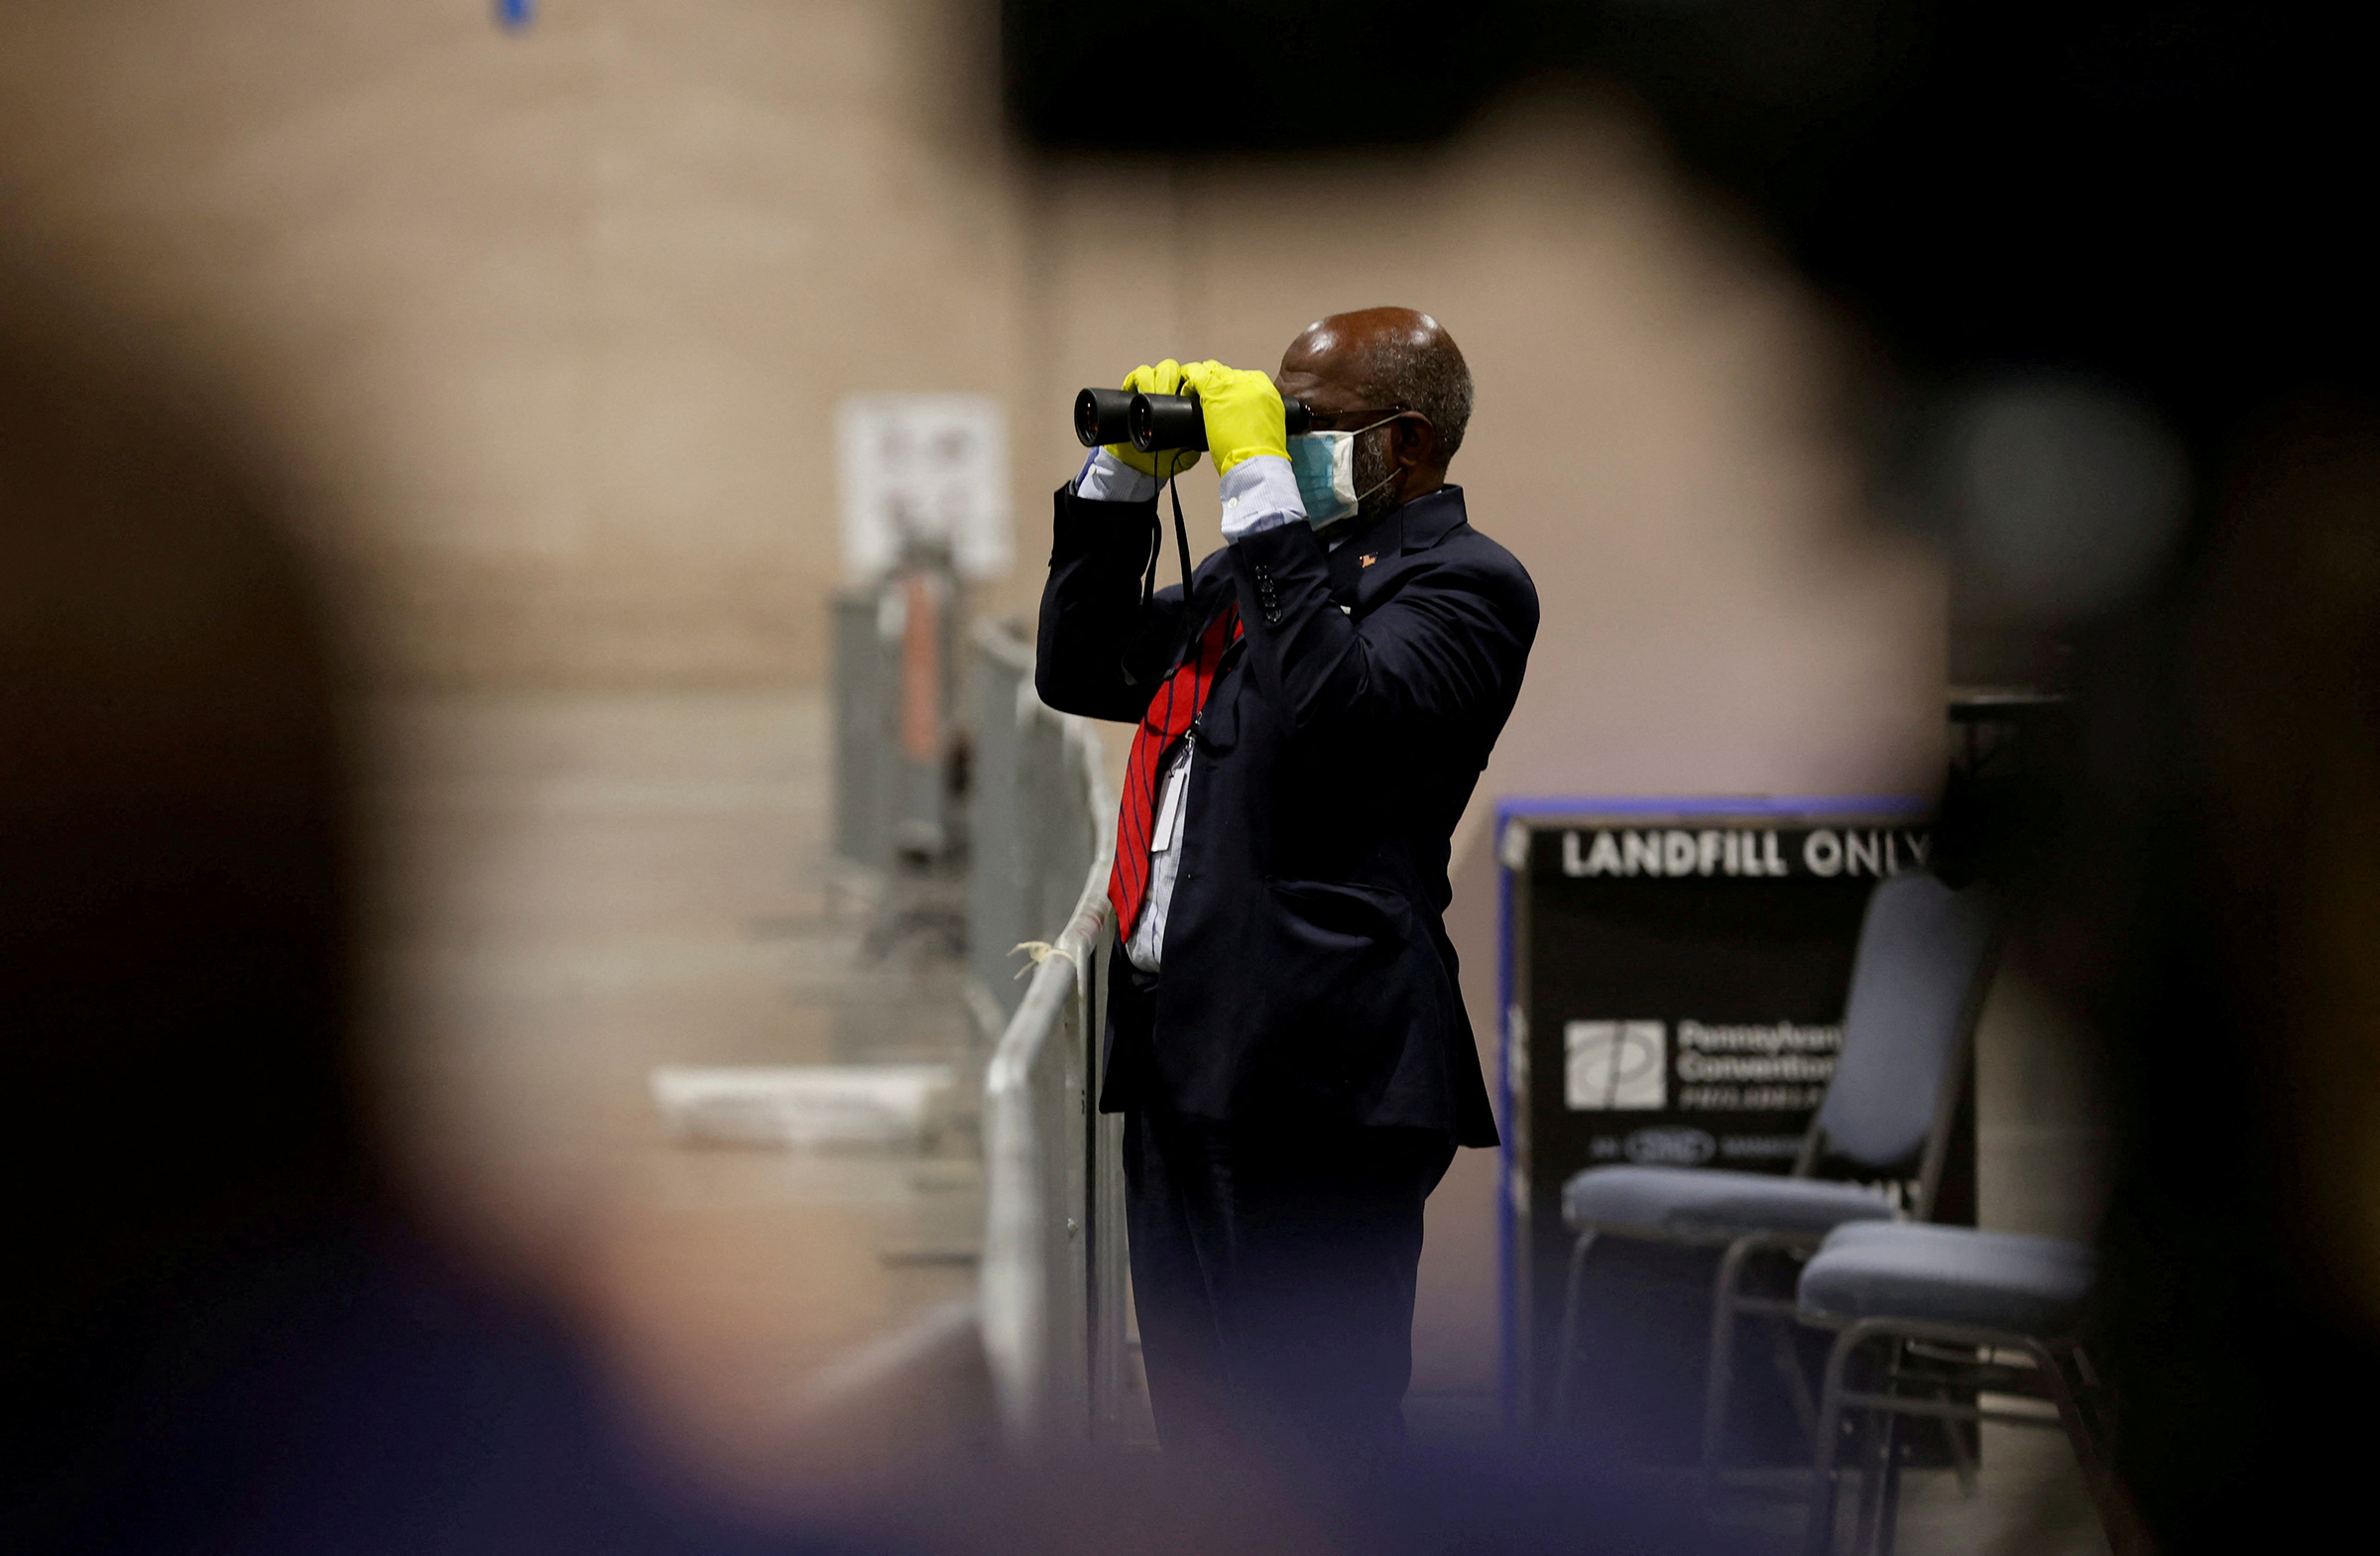 A poll watcher observes through a pair of binoculars as votes are counted at the Pennsylvania Convention Center in Philadelphia, on Nov. 3, 2020.